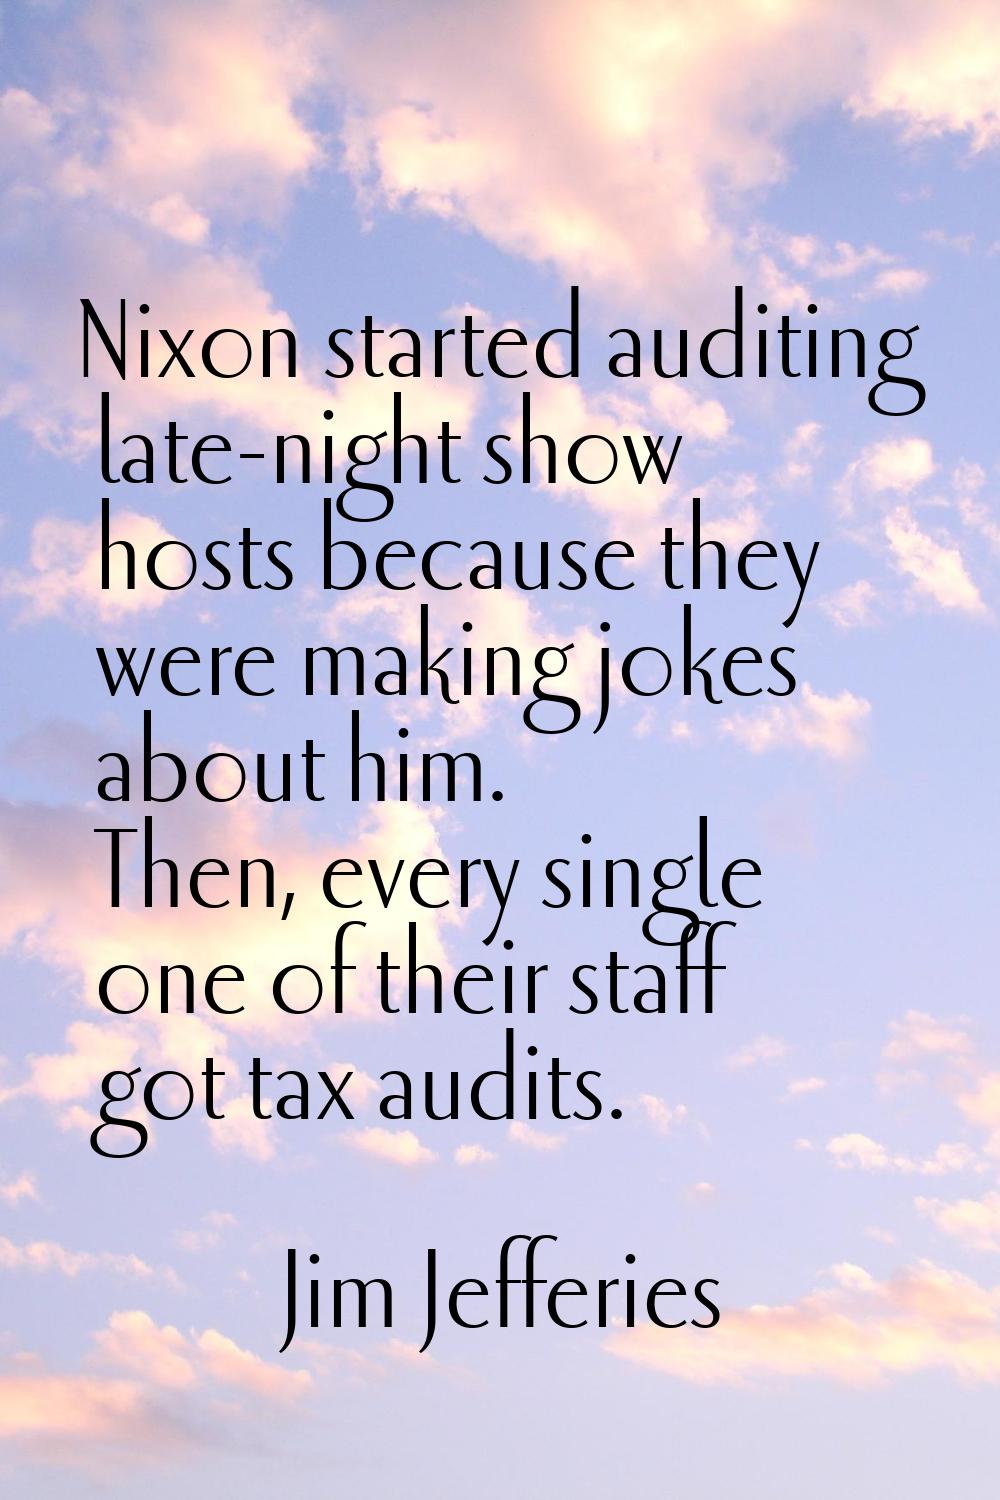 Nixon started auditing late-night show hosts because they were making jokes about him. Then, every 